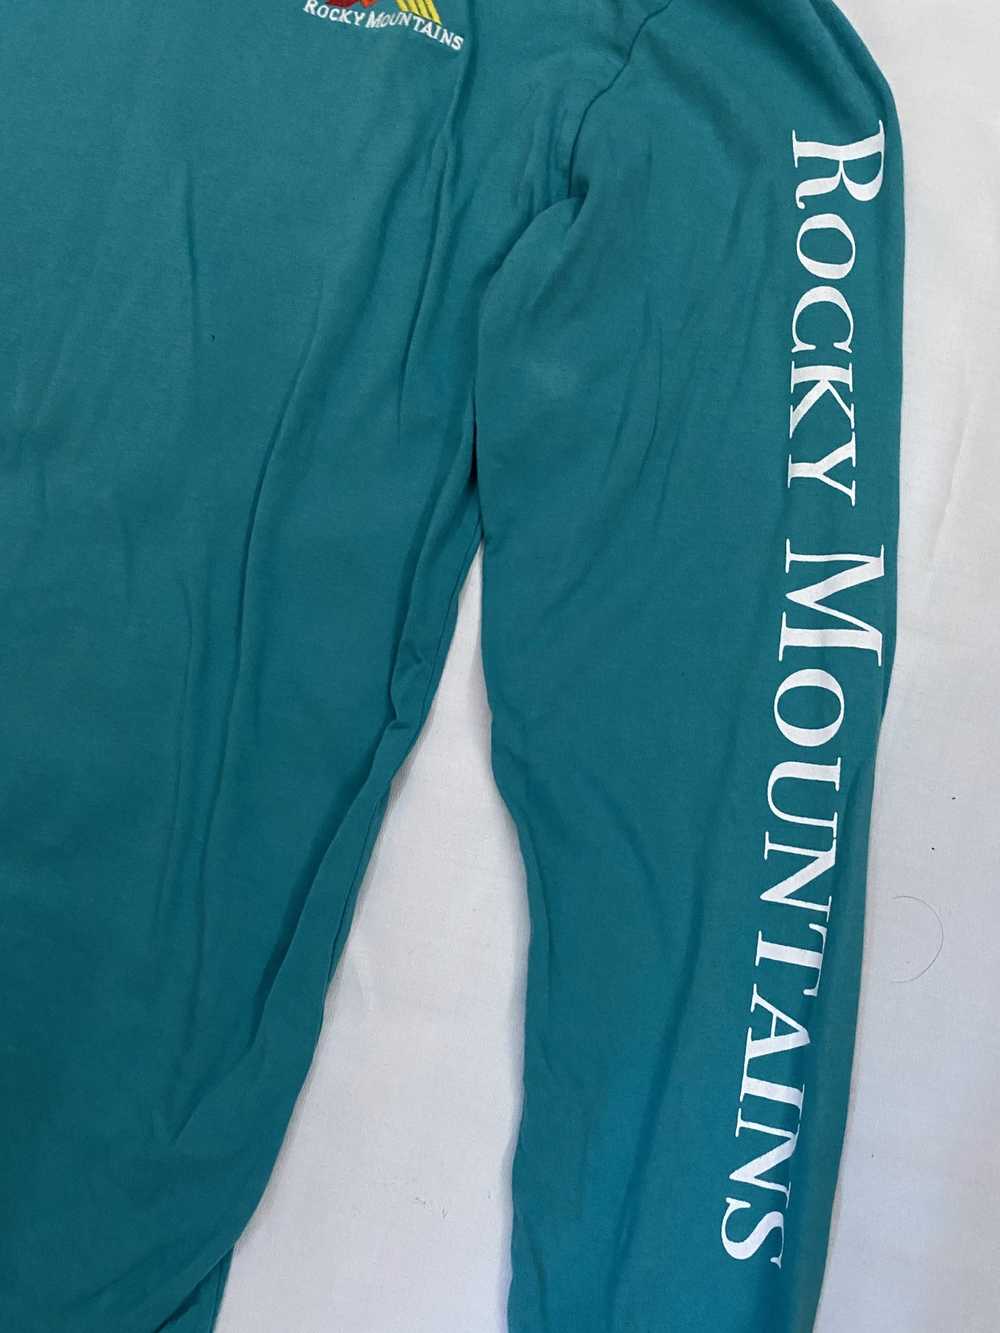 Pacsun Rocky Mountains Long Sleeve T-Shirt - image 3